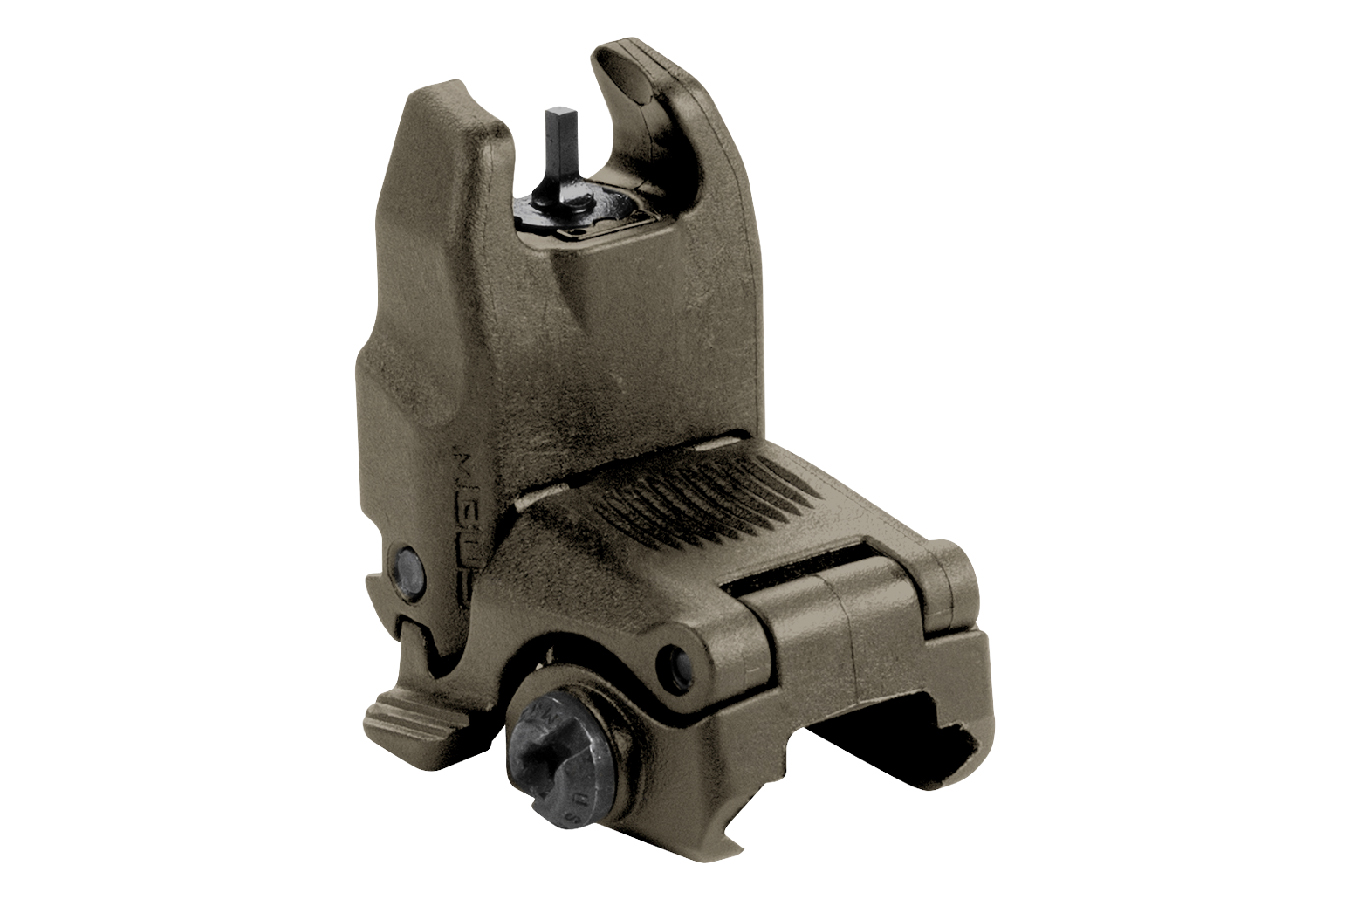 MAGPUL MBUS FRONT BACK-UP SIGHT GEN 2 (OD GREEN)